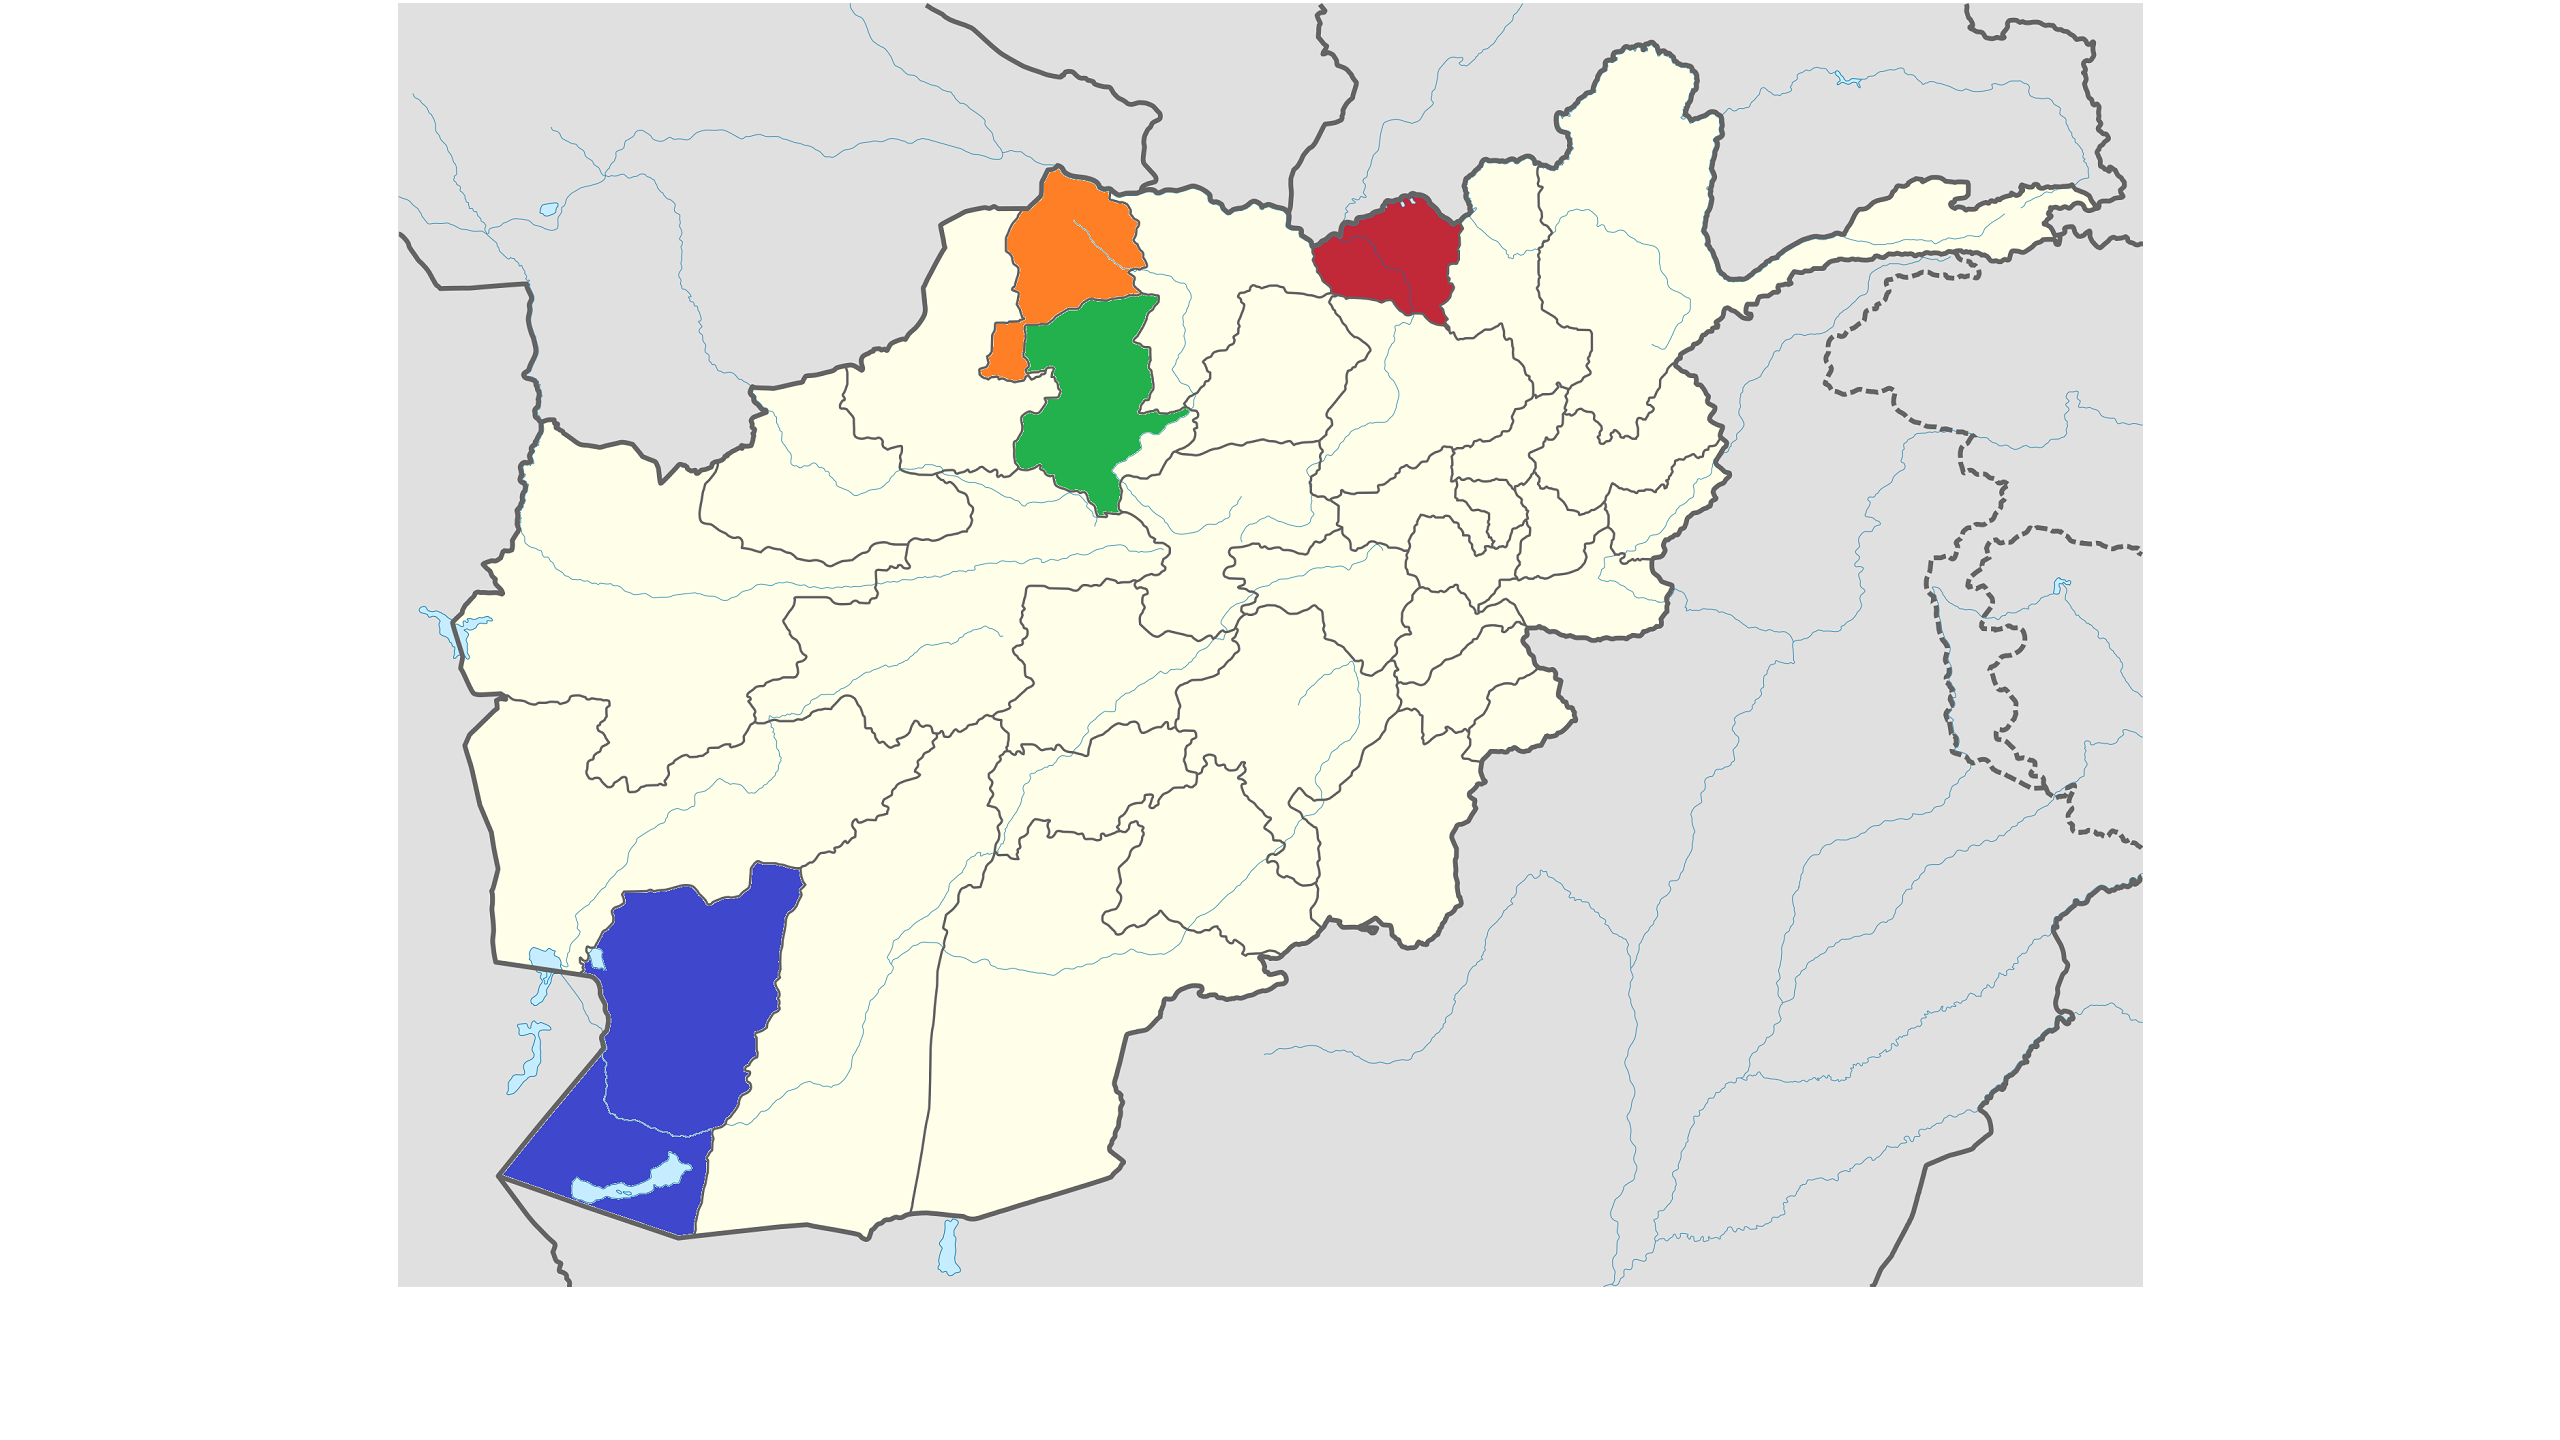 Taliban Insurgents Take Over 4 Provincial Capitals in Afghanistan